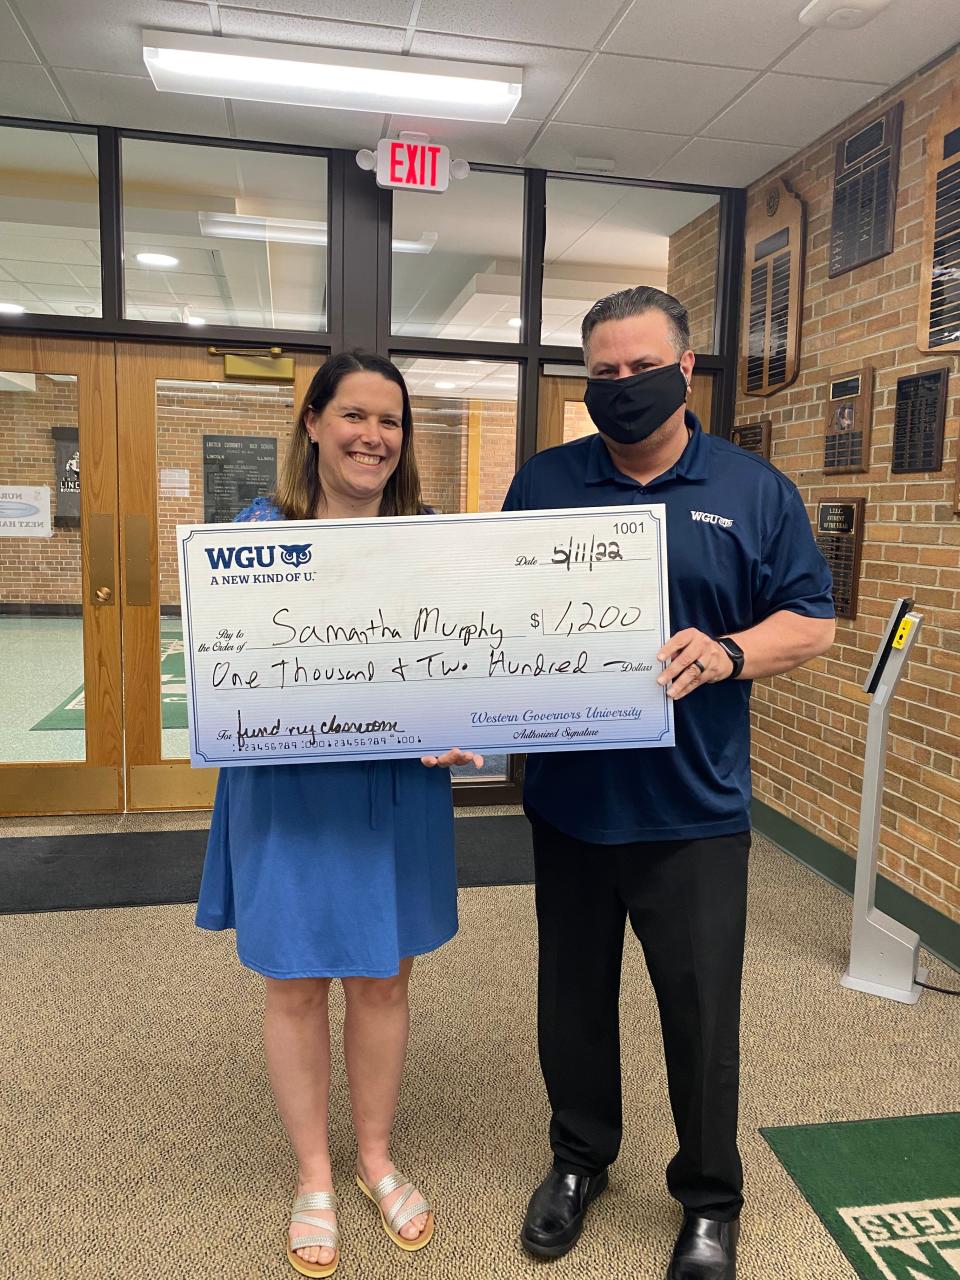 Samantha Murphy, a tenth-grade English teacher at Lincoln Community High School, received a $1,200 grant from Dan Winkler with Western Governors University to help buy additional books for her classroom.